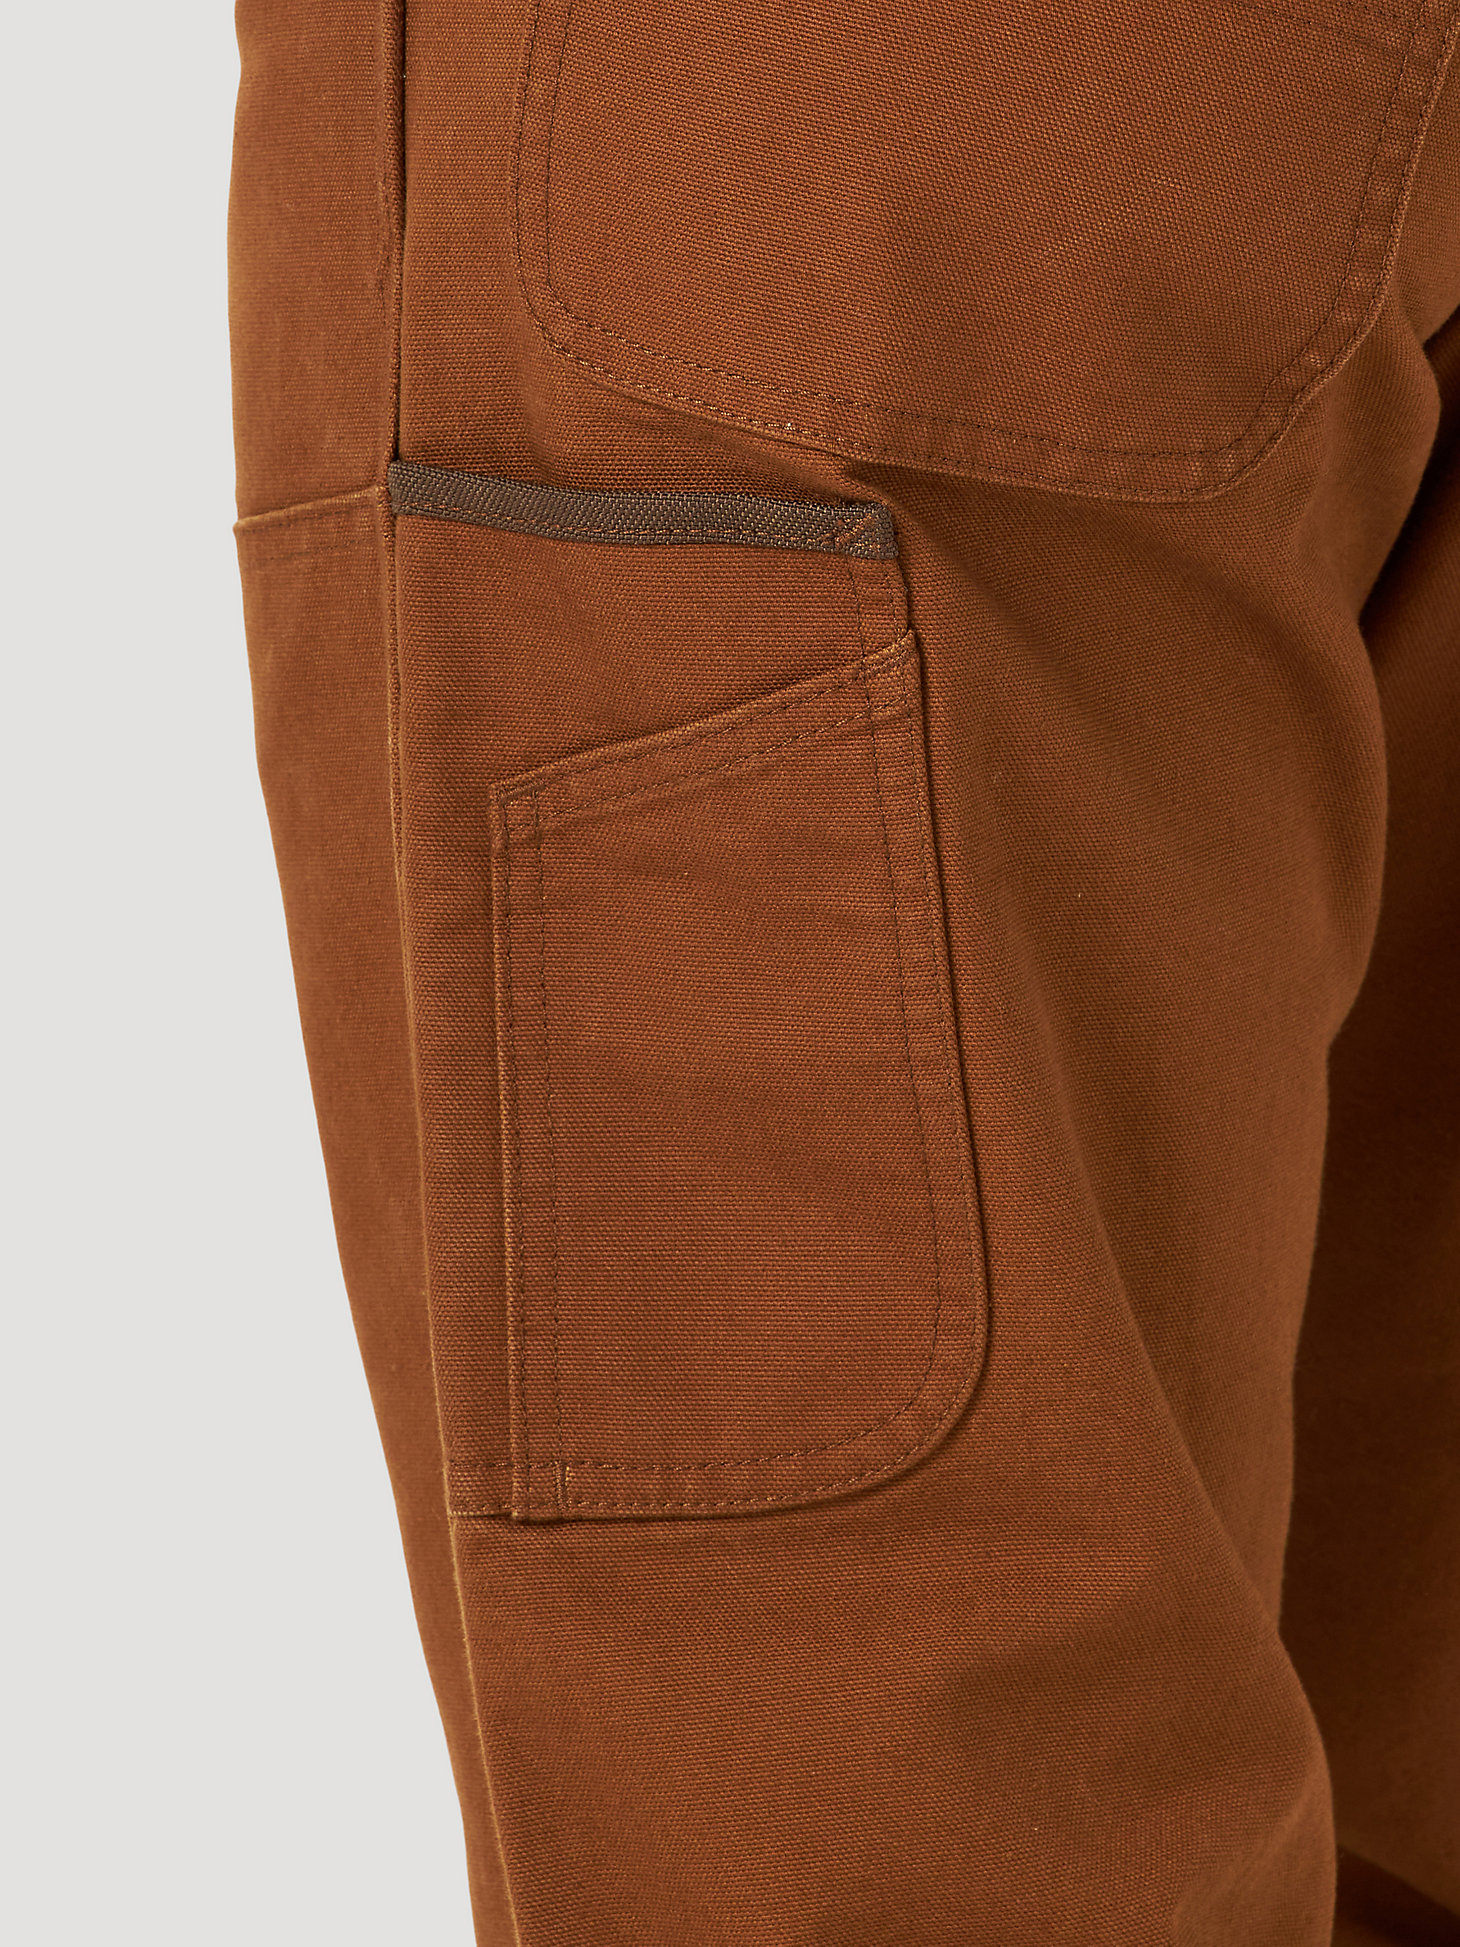 Wrangler® RIGGS Workwear® Mason Relaxed Fit Canvas Pant in Toffee Brown alternative view 6